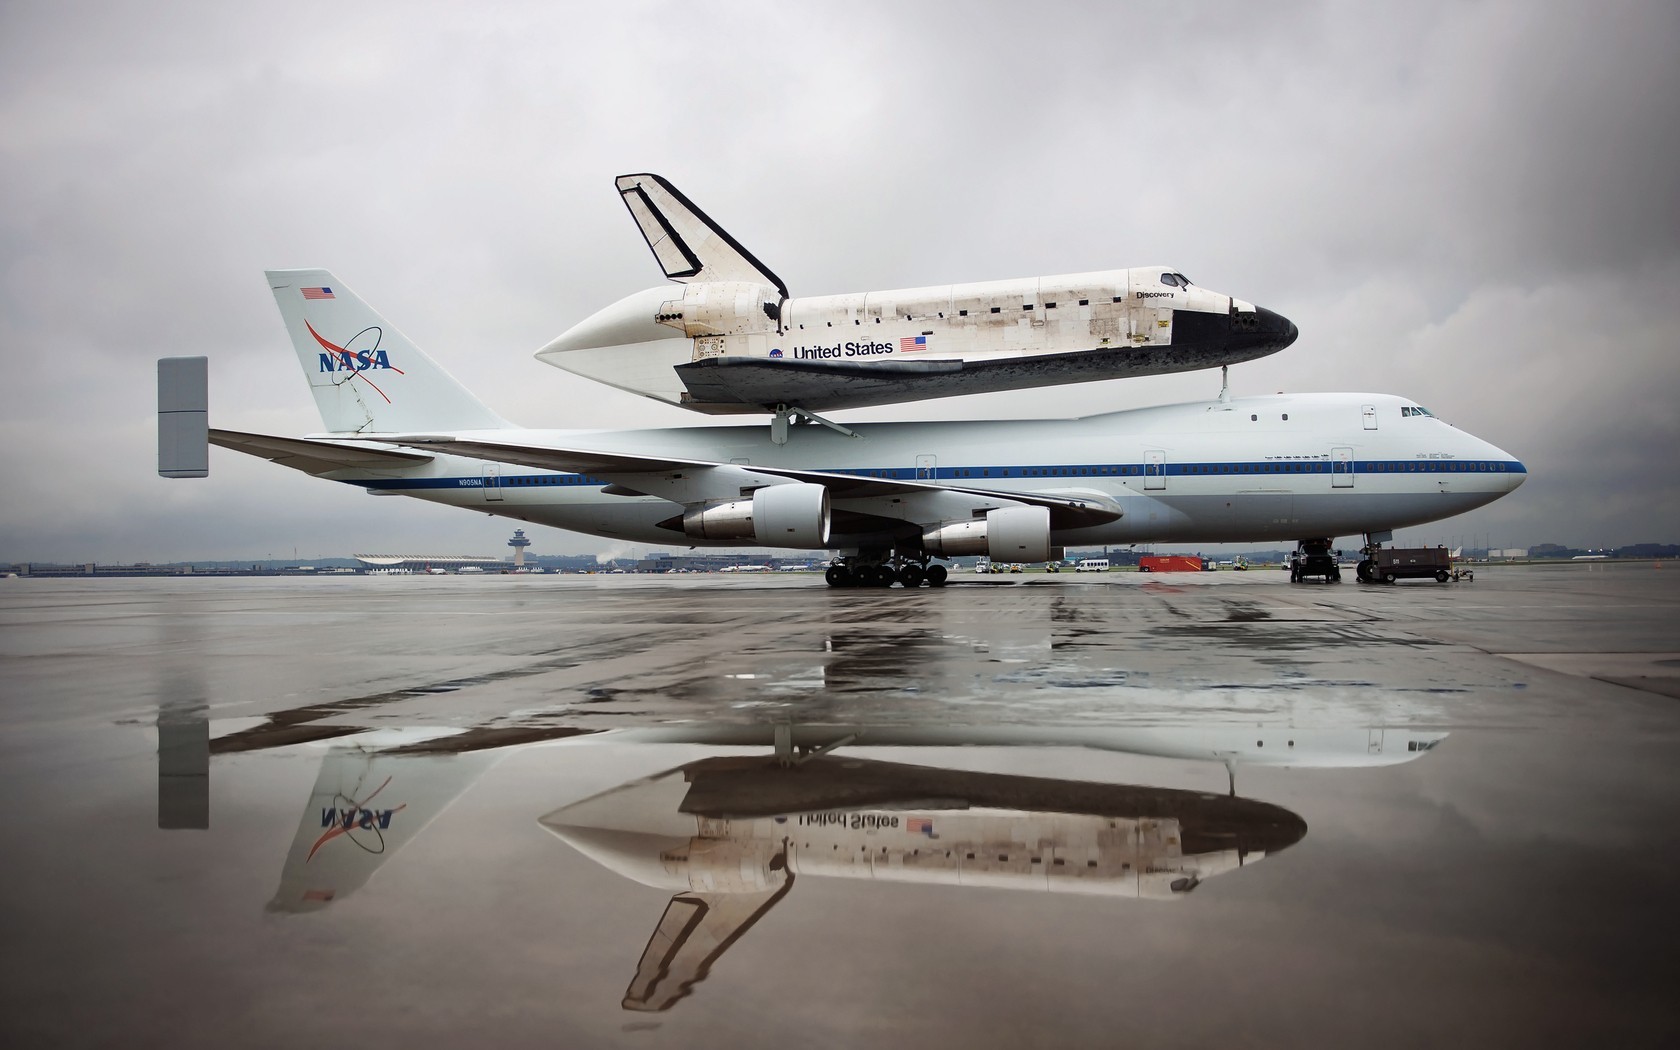 General 1680x1050 NASA Boeing 747 Space Shuttle Discovery aircraft reflection American aircraft vehicle side view space shuttle sky clouds water puddle